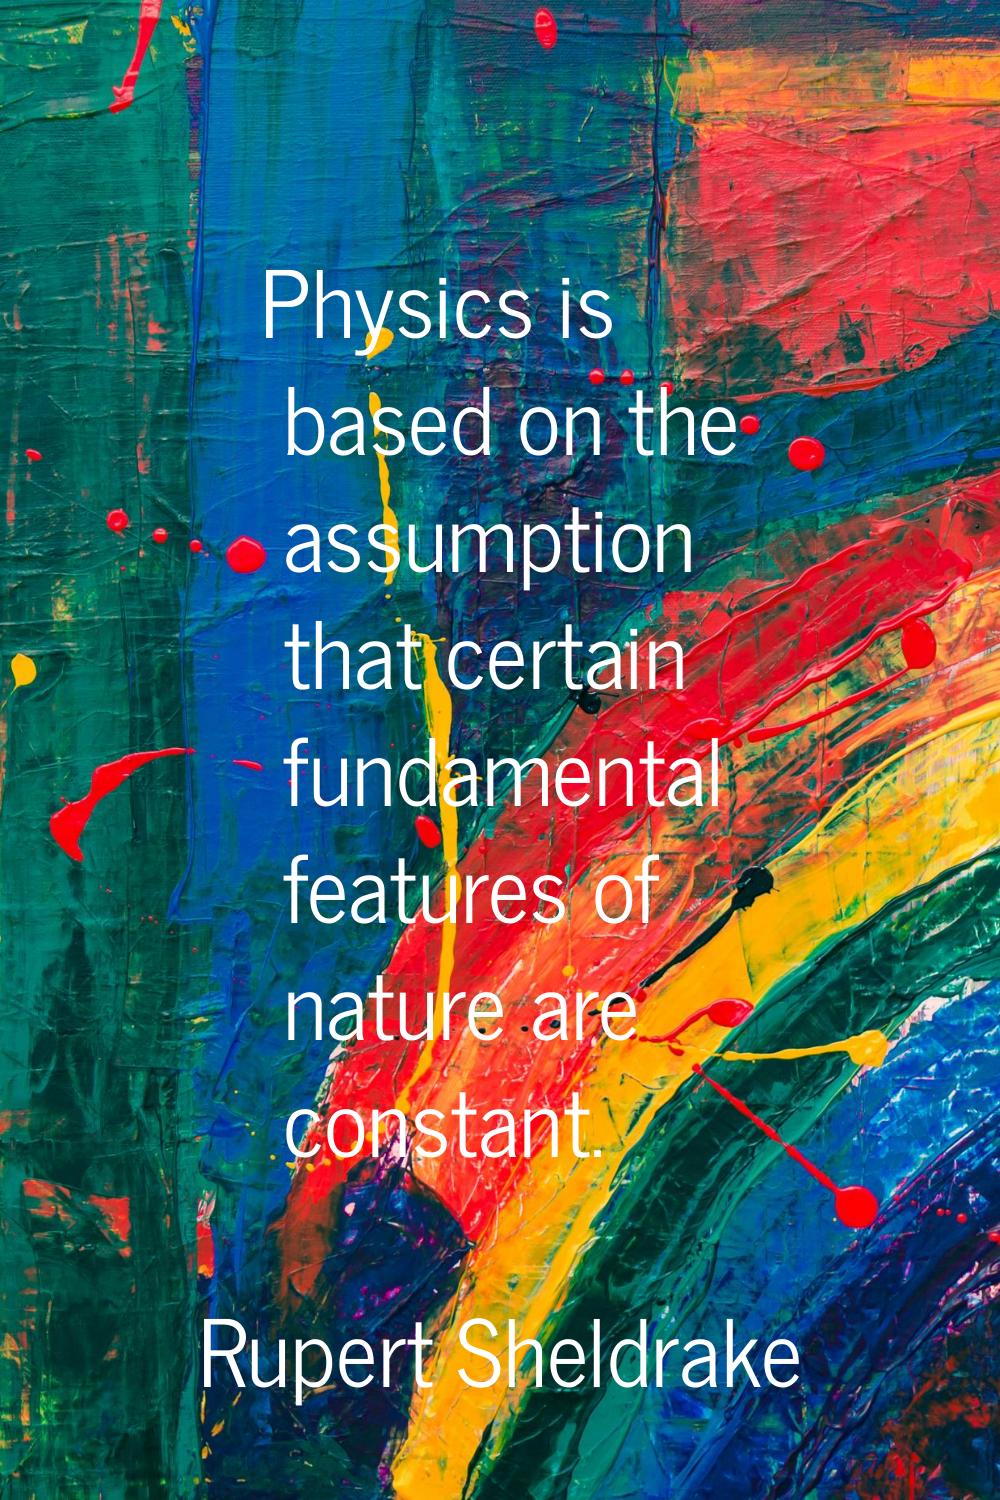 Physics is based on the assumption that certain fundamental features of nature are constant.